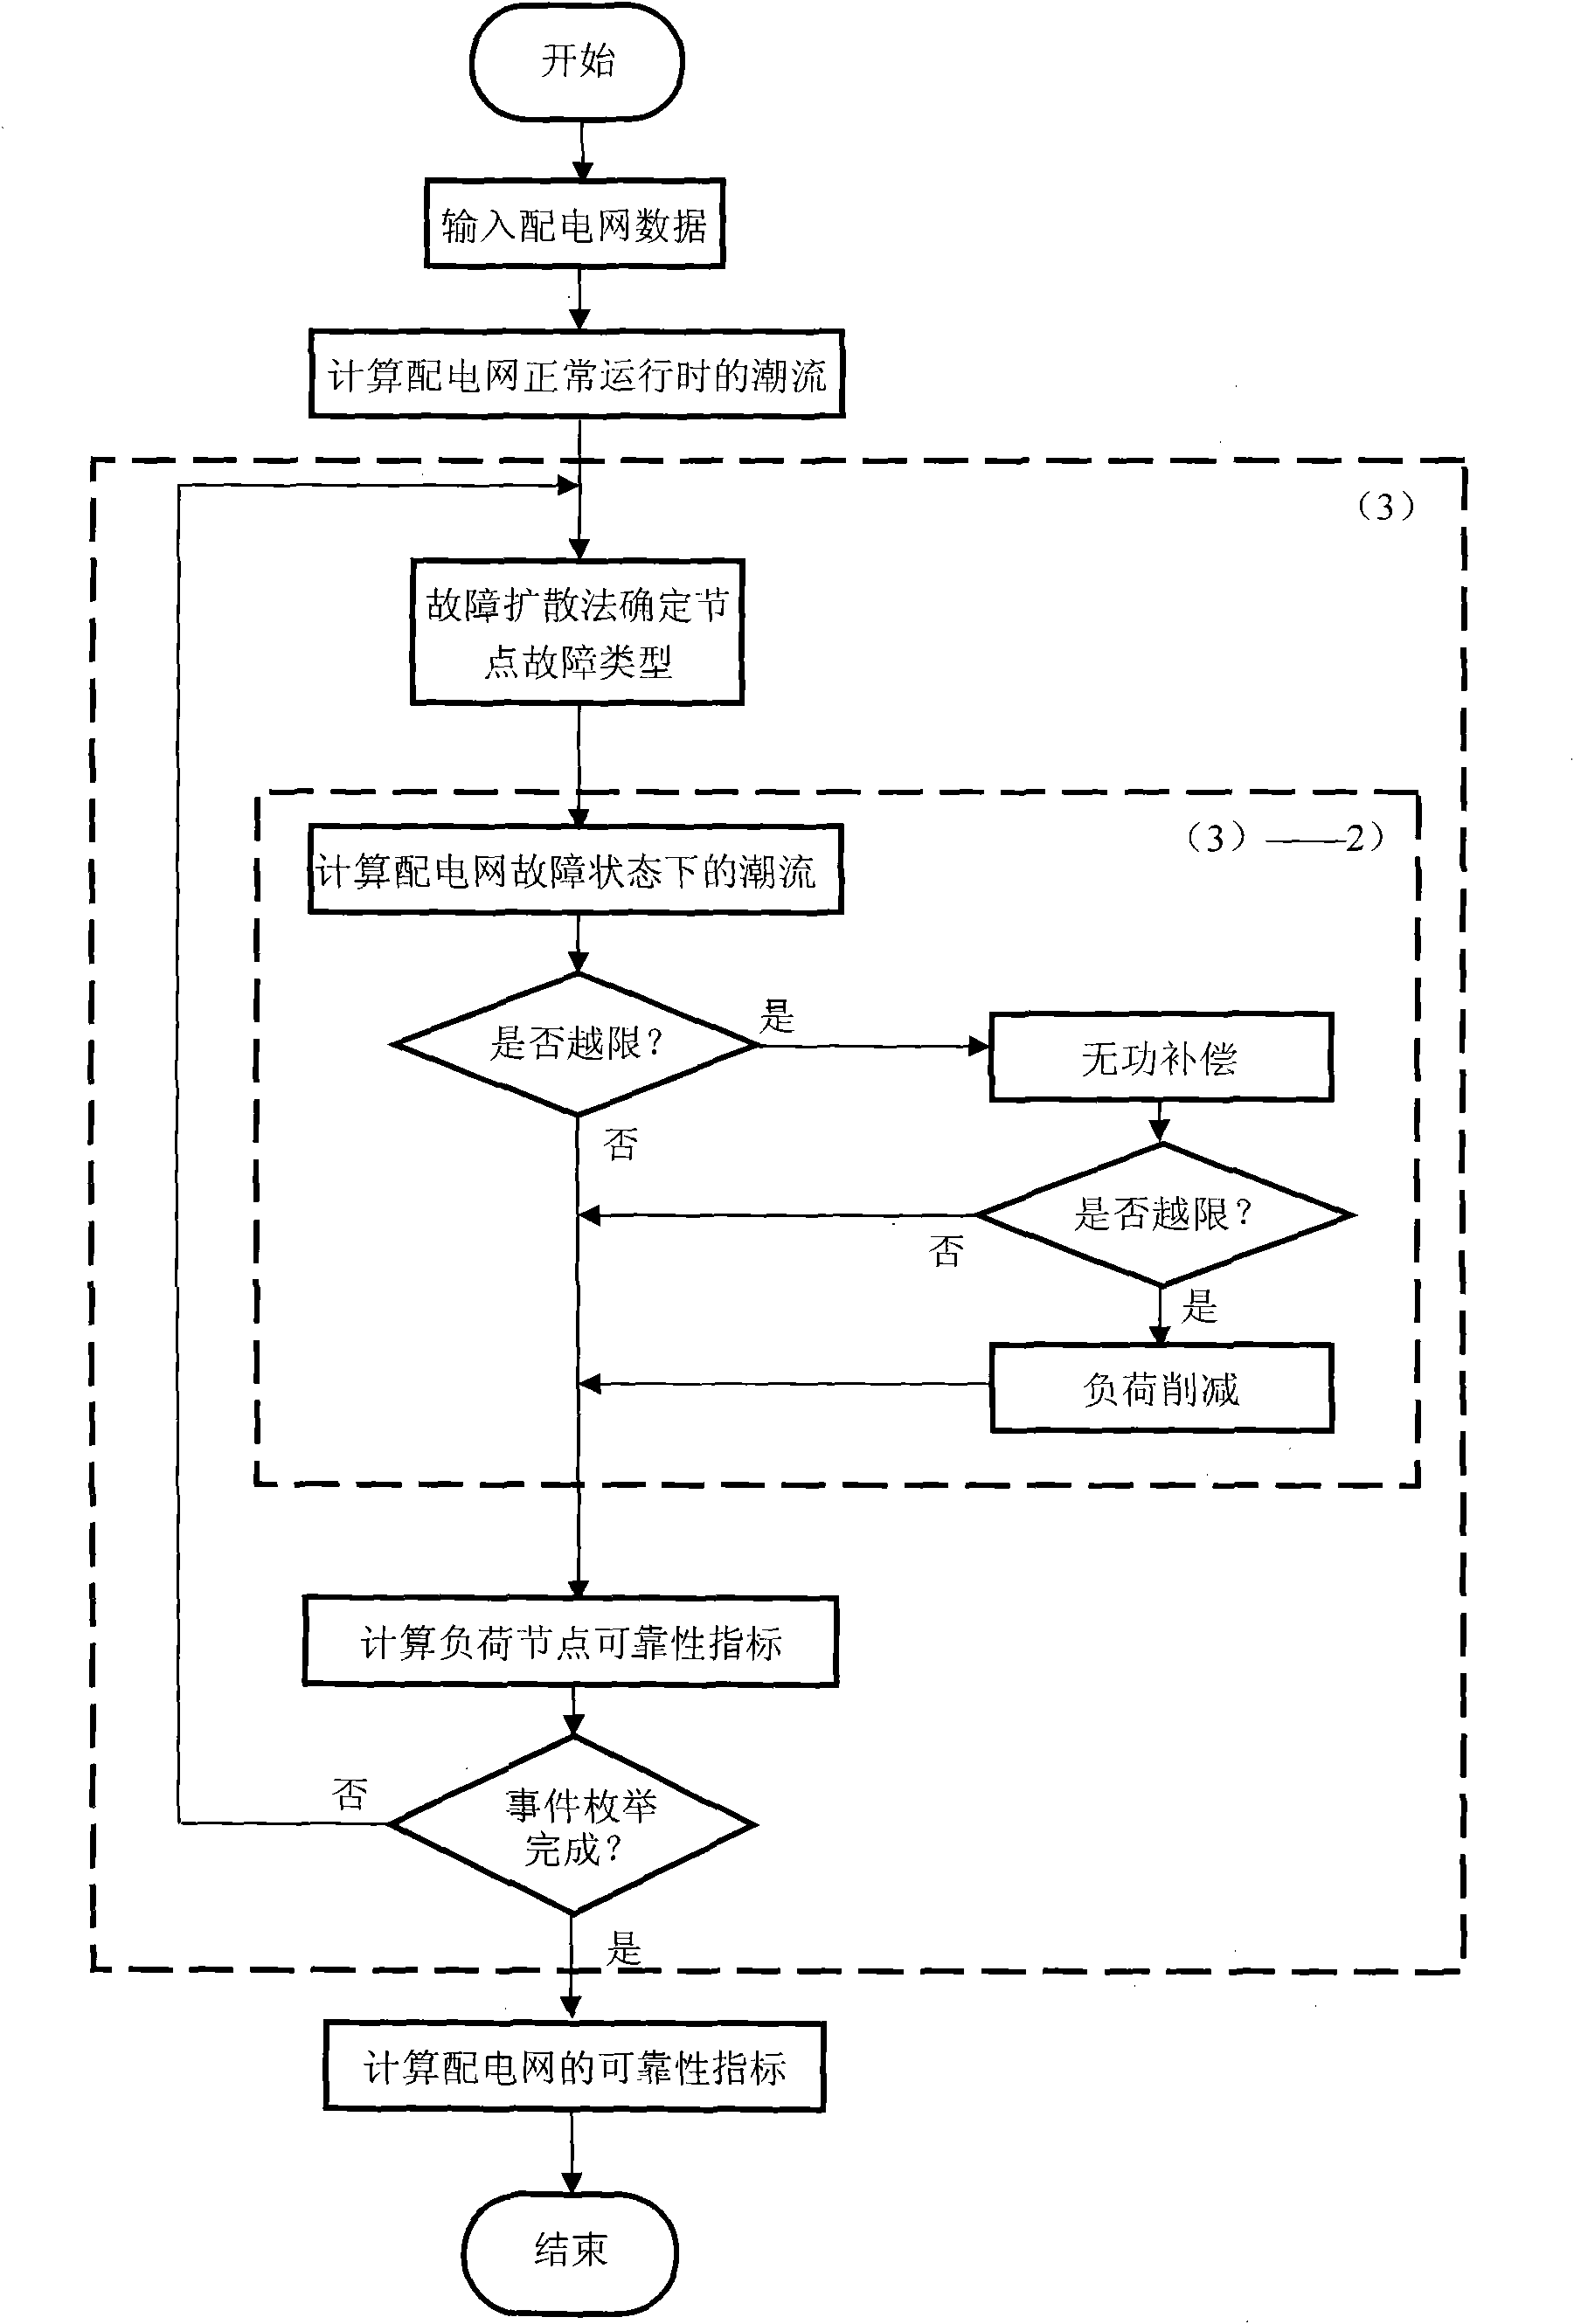 Failure propagation method for evaluating reliability of distribution network